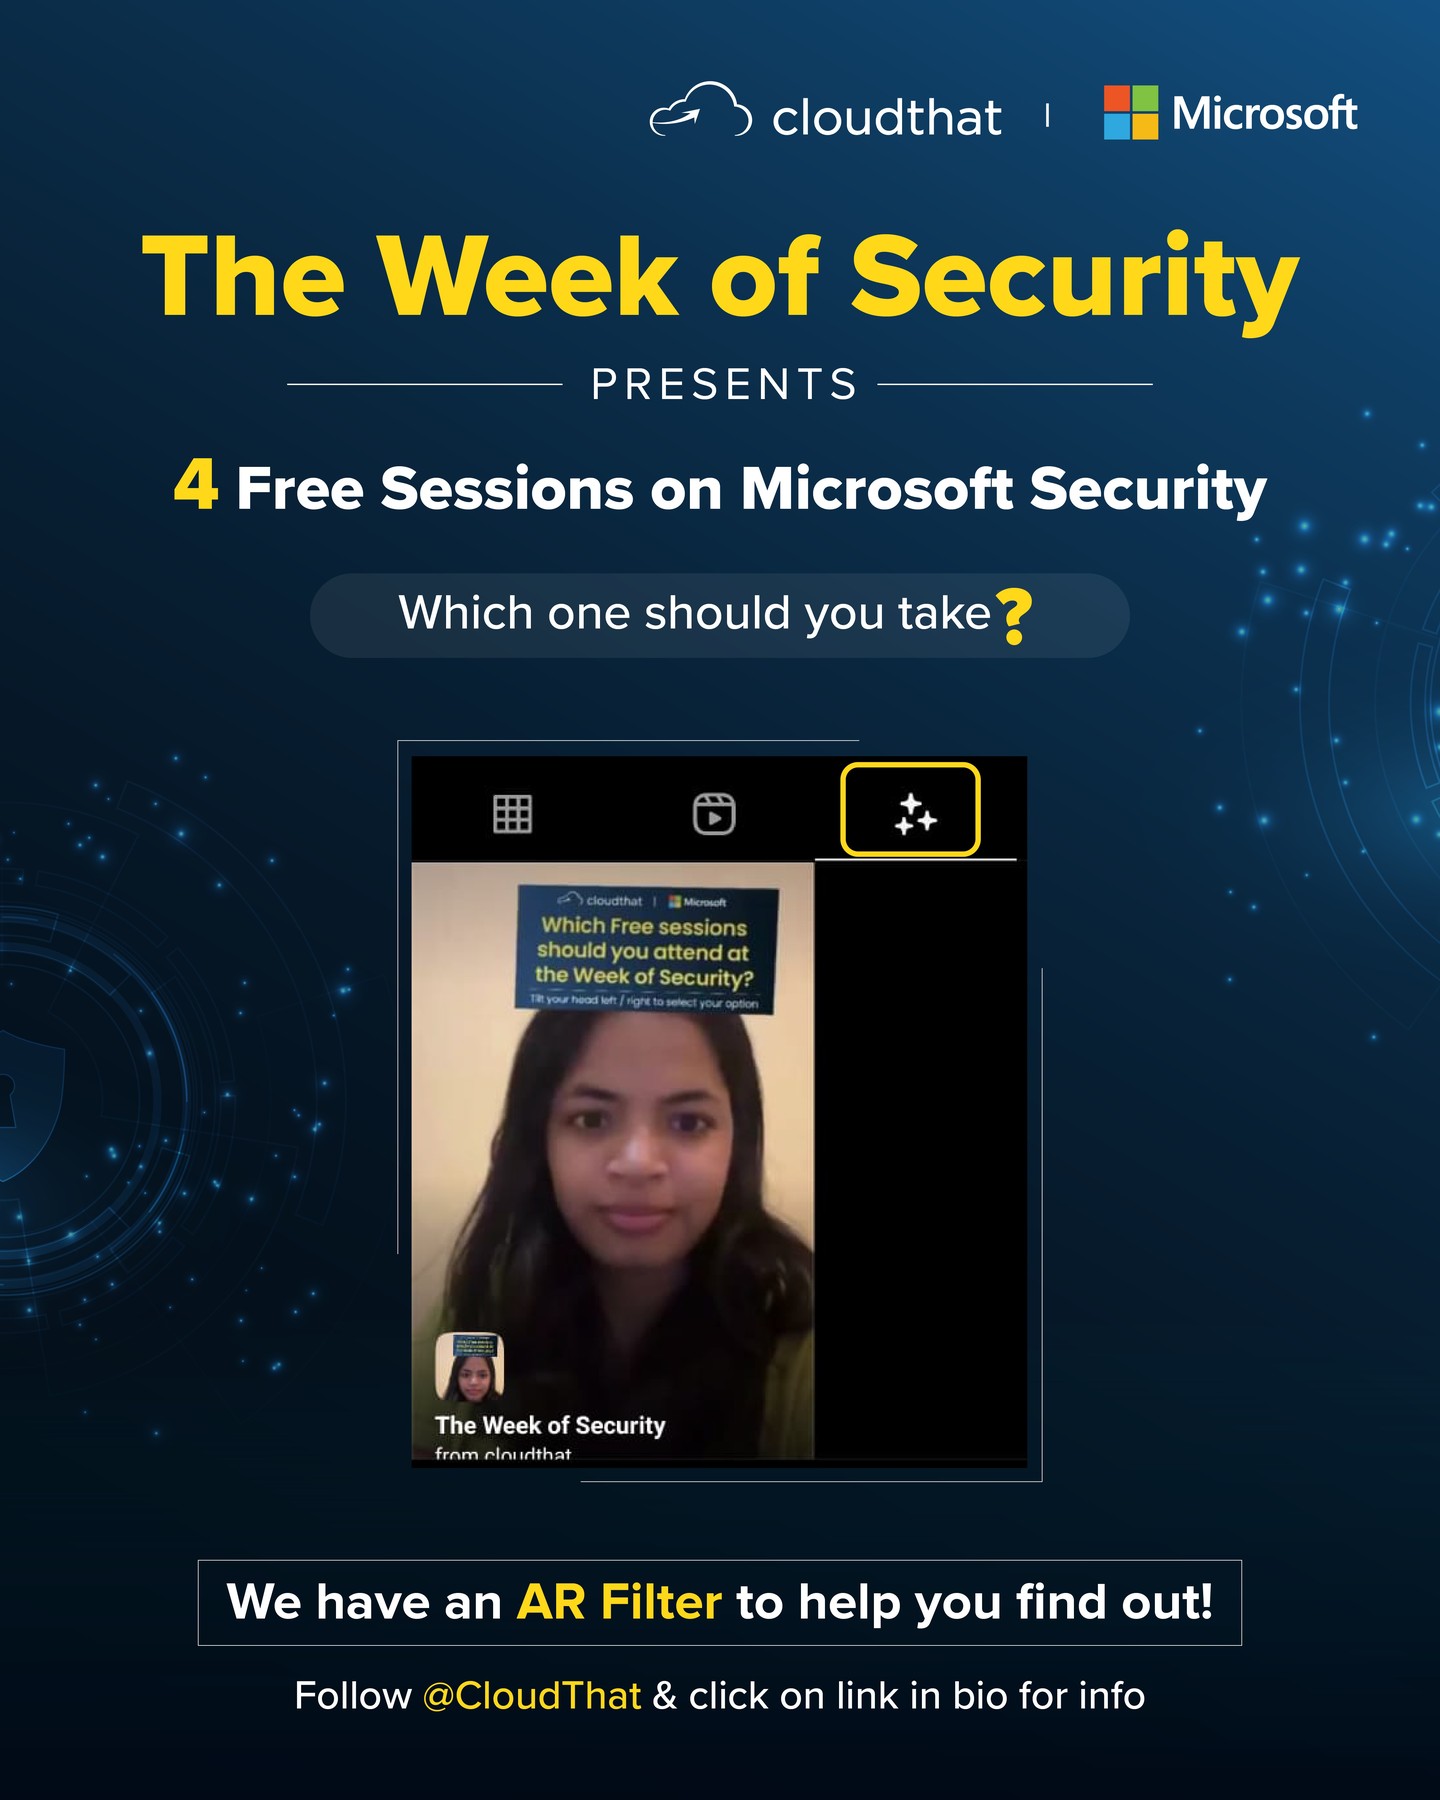 Are you a cybersecurity enthusiast? Microsoft and CloudThat have an amazing opportunity for you to learn for free during The Week of Security. These training sessions aim to empower individuals to enhance their cybersecurity skills with tailored Microsoft Security training sessions.

All you have to do is try our new AR Filter to find out which training suits you best. Here's how:
1. Follow the @cloudthat handle
2. Go to the effects section on the main page
3. Try our new filter
4. DM us a picture of your results 
5. Get your Free Training Registration Link 

For further information on how to participate, click on the link in the bio

#microsoftsecurity #certified #arfilter #freetraining #cybersecurity